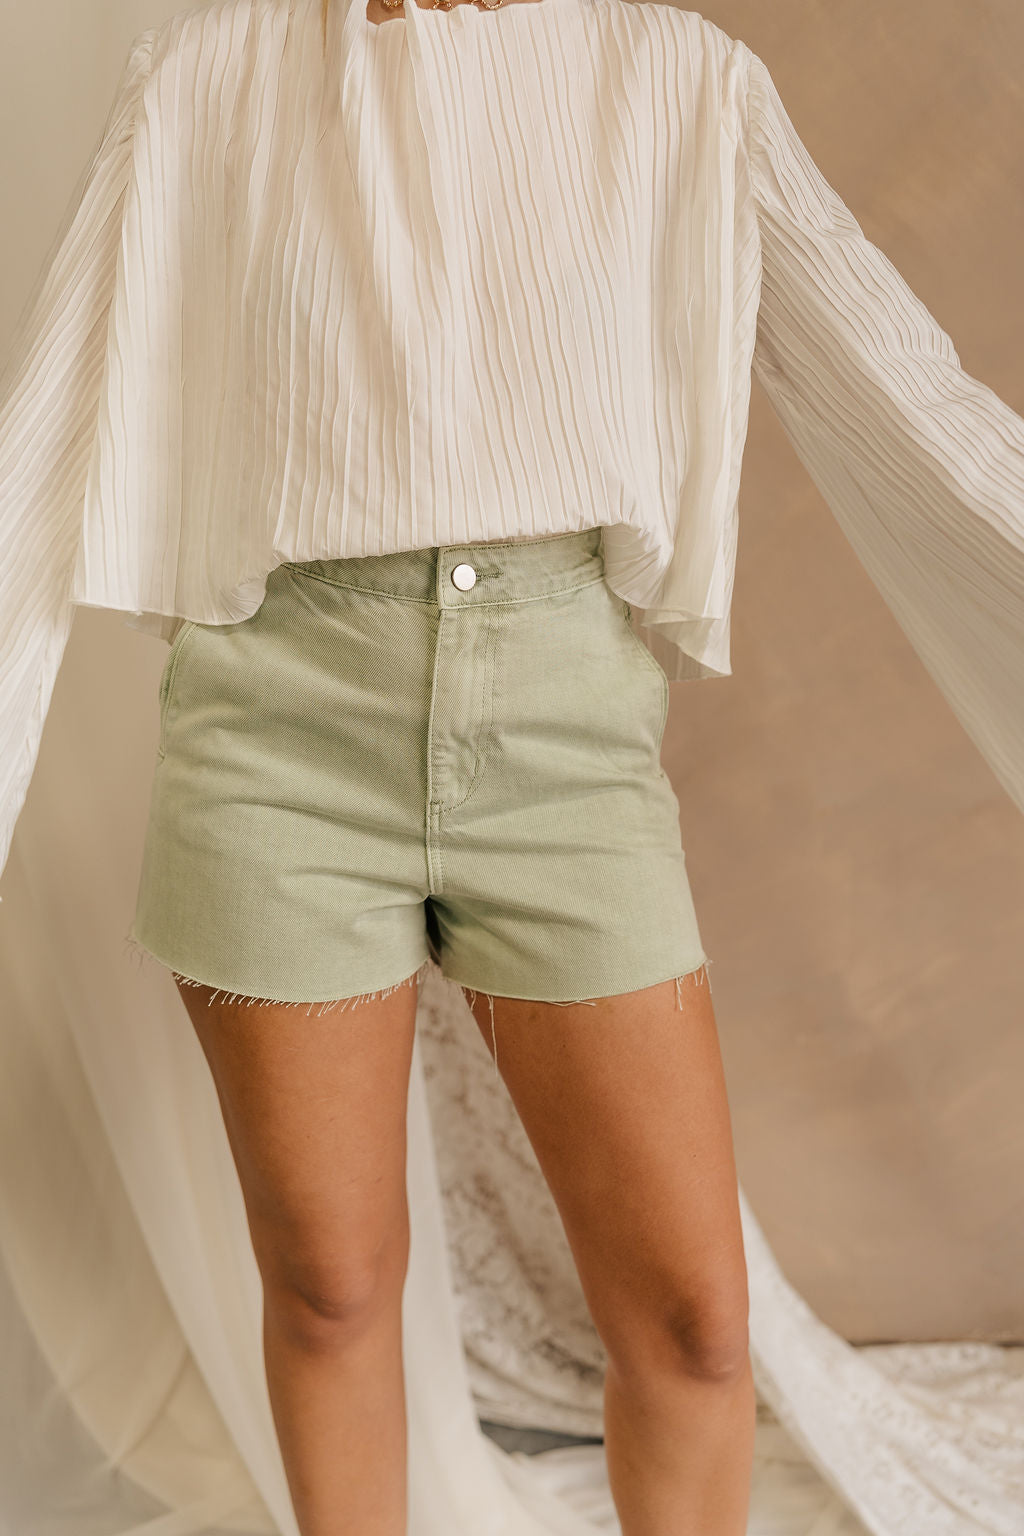 Front view of female model wearing the Paige Sage Denim Shorts which features Light Sage Denim Fabric, Two Front Pockets,Two Back Pockets, Fray Hem and Belt Loops.